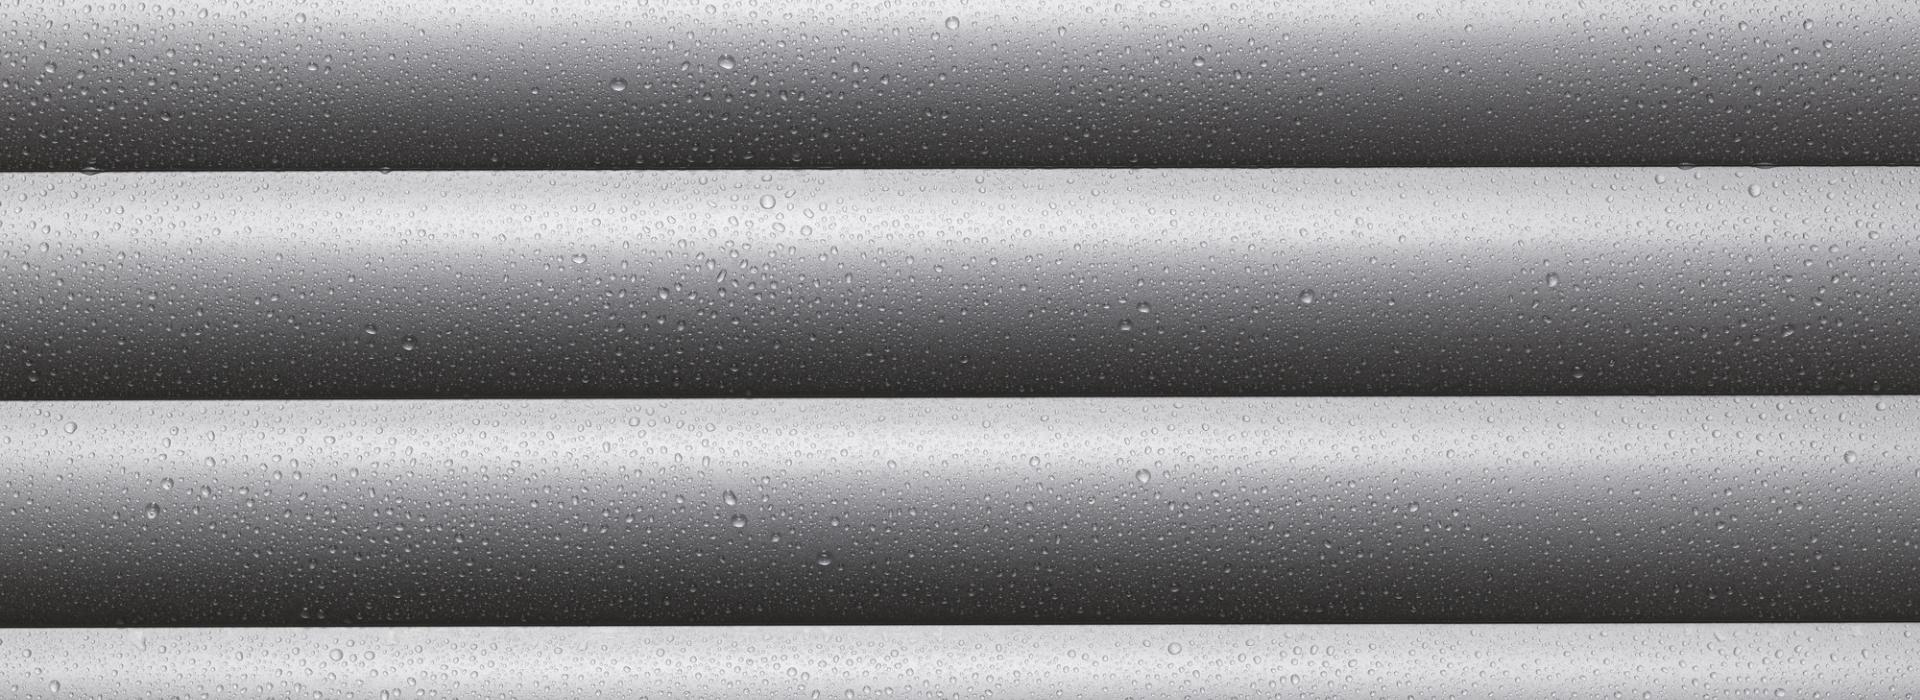 Roller shutter profile detailed view with water drops